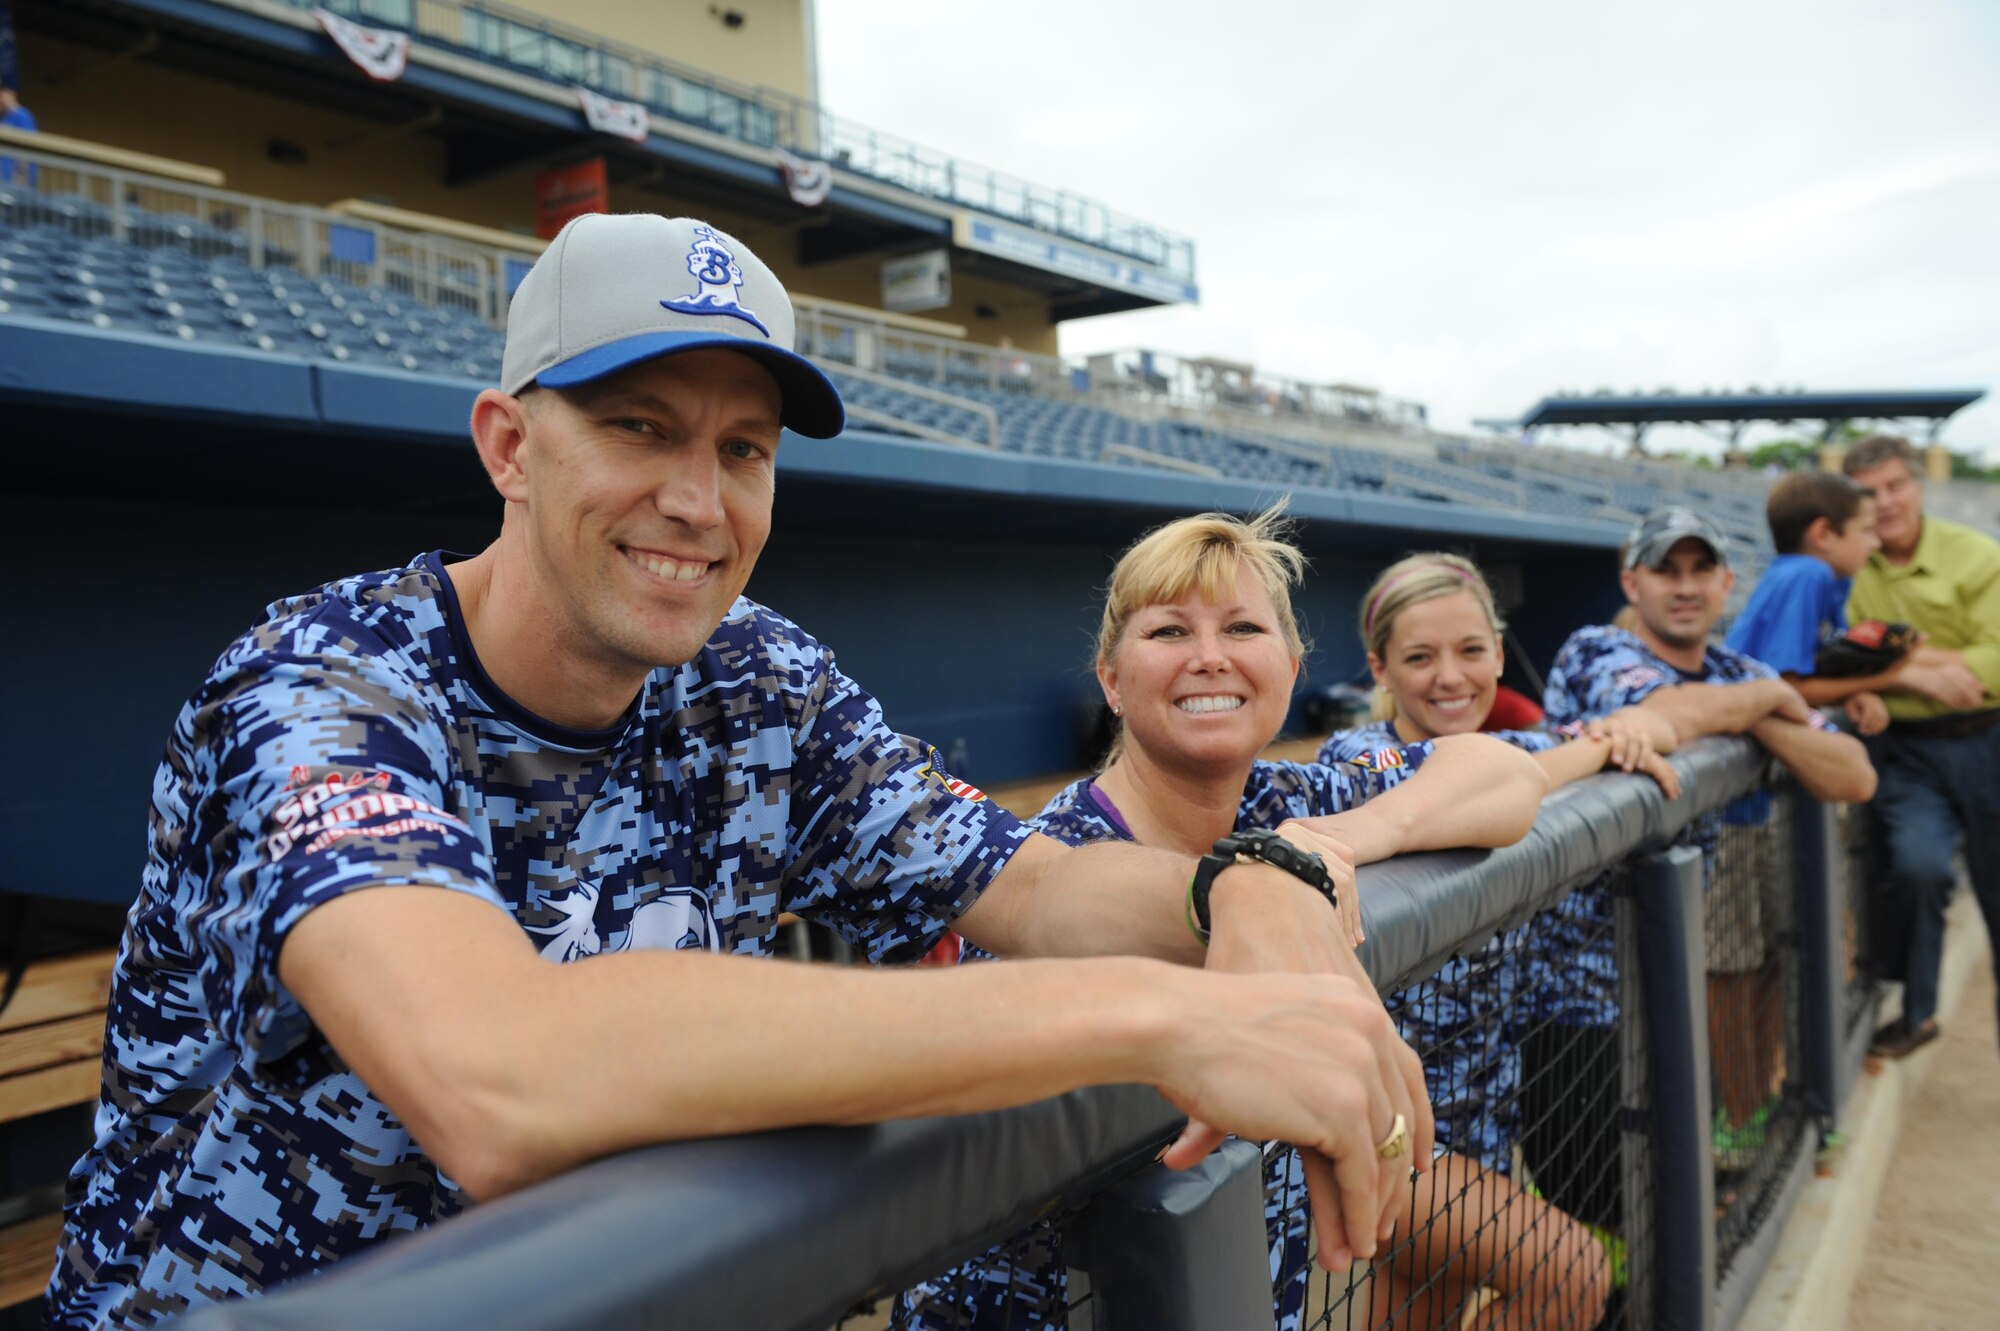 Members of the “Boots” team pose for a photo from their dugout during the “Boots versus Badges” softball game at the Biloxi Shuckers MGM Park April 21, 2016, Biloxi, Miss. The game was the kickoff event for the 2016 Special Olympics Mississippi Summer Games, which will be hosted by Keesler Air Force Base, Miss., May 20-21. (U.S. Air Force photo by Kemberly Groue)